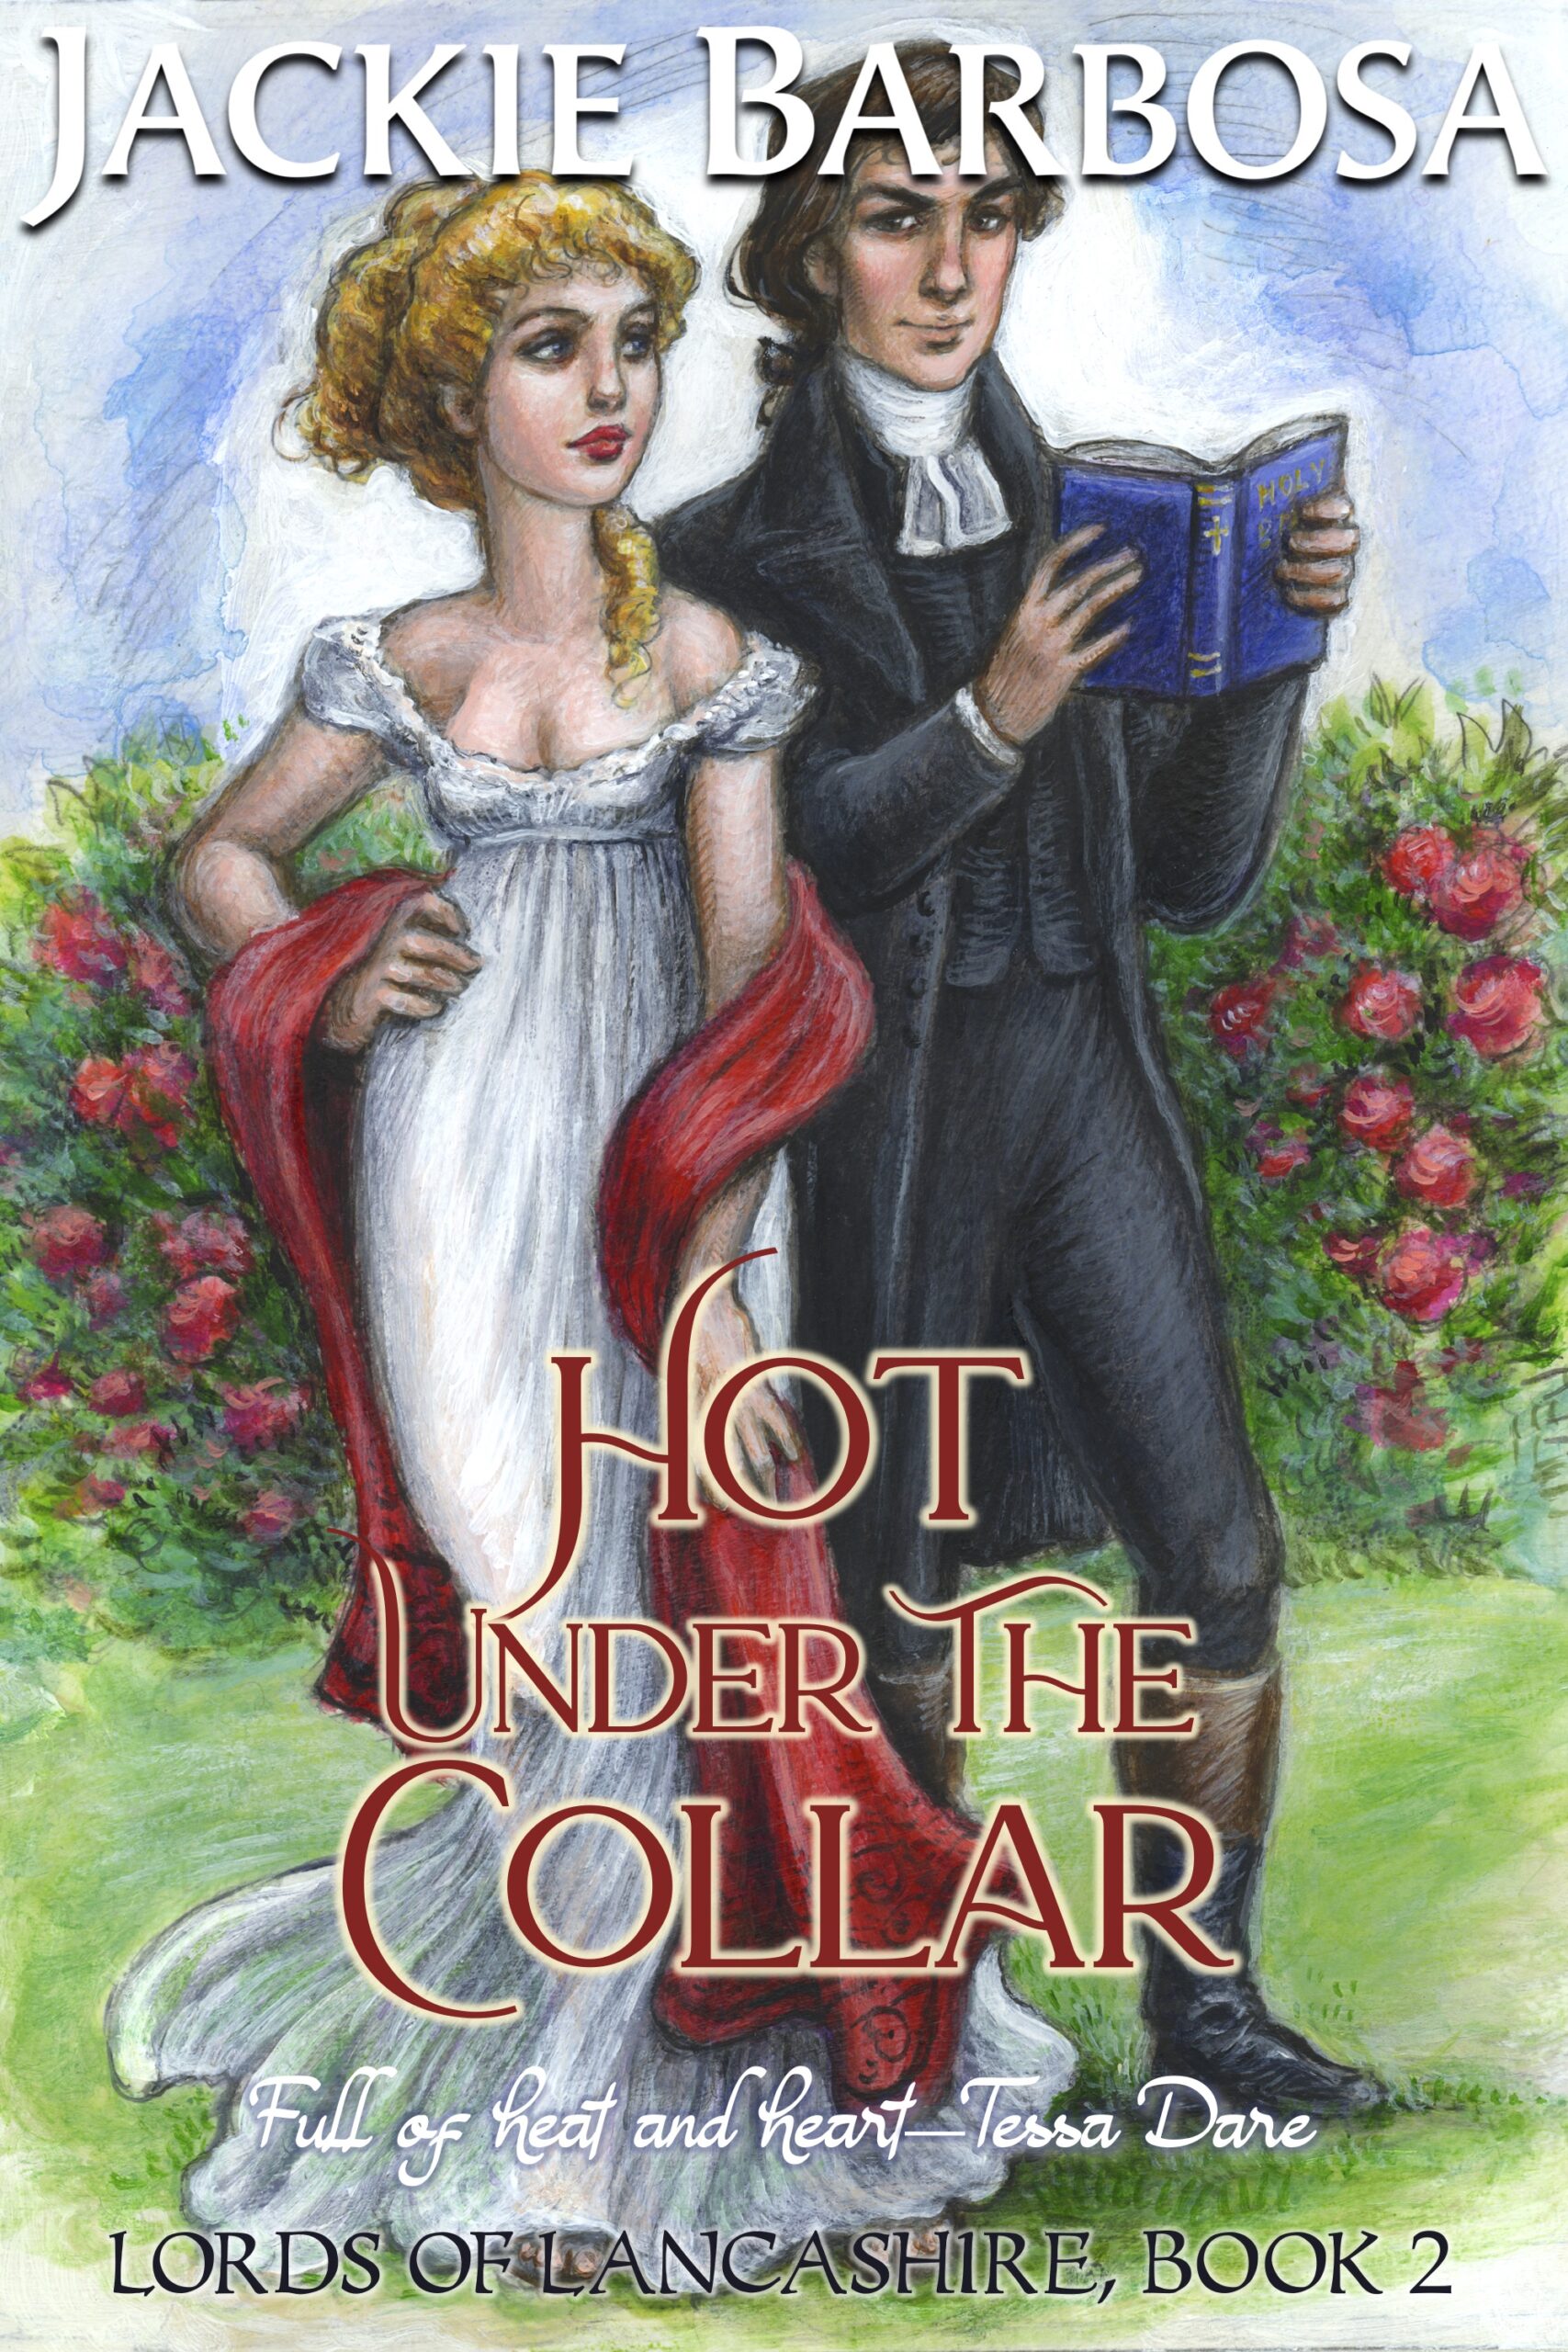 Hot Under the Collar by Jackie Barbosa